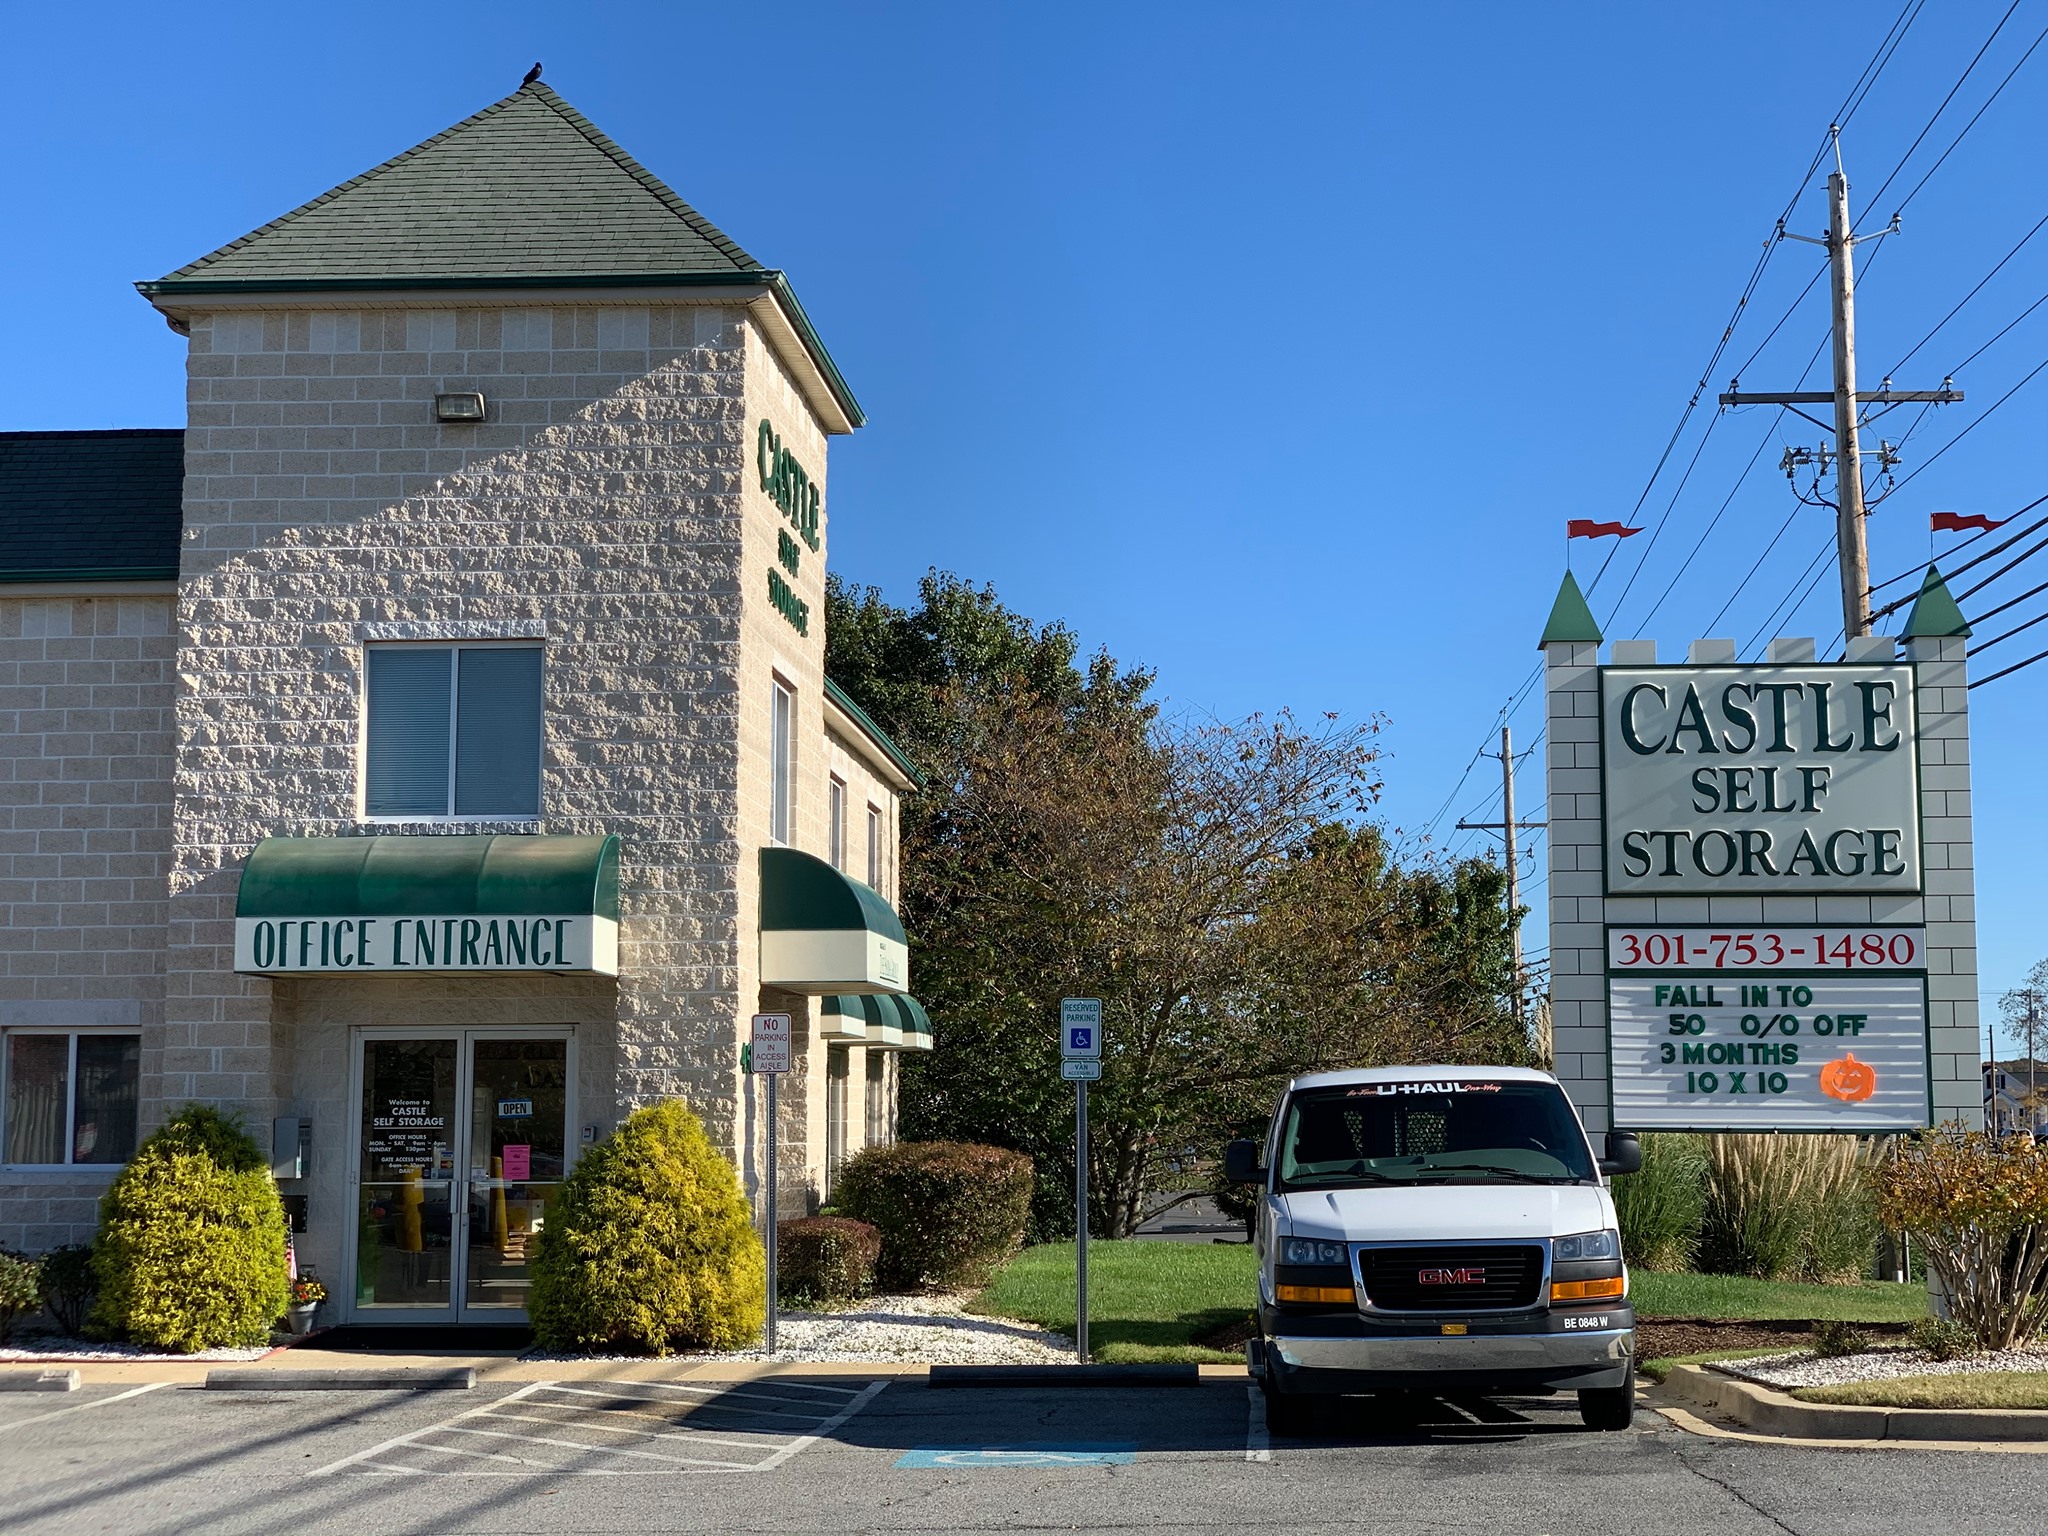 Self storage facility with a rental truck in the parking lot and a s sign that reads: "Castle Self Storage 301-753-1480"